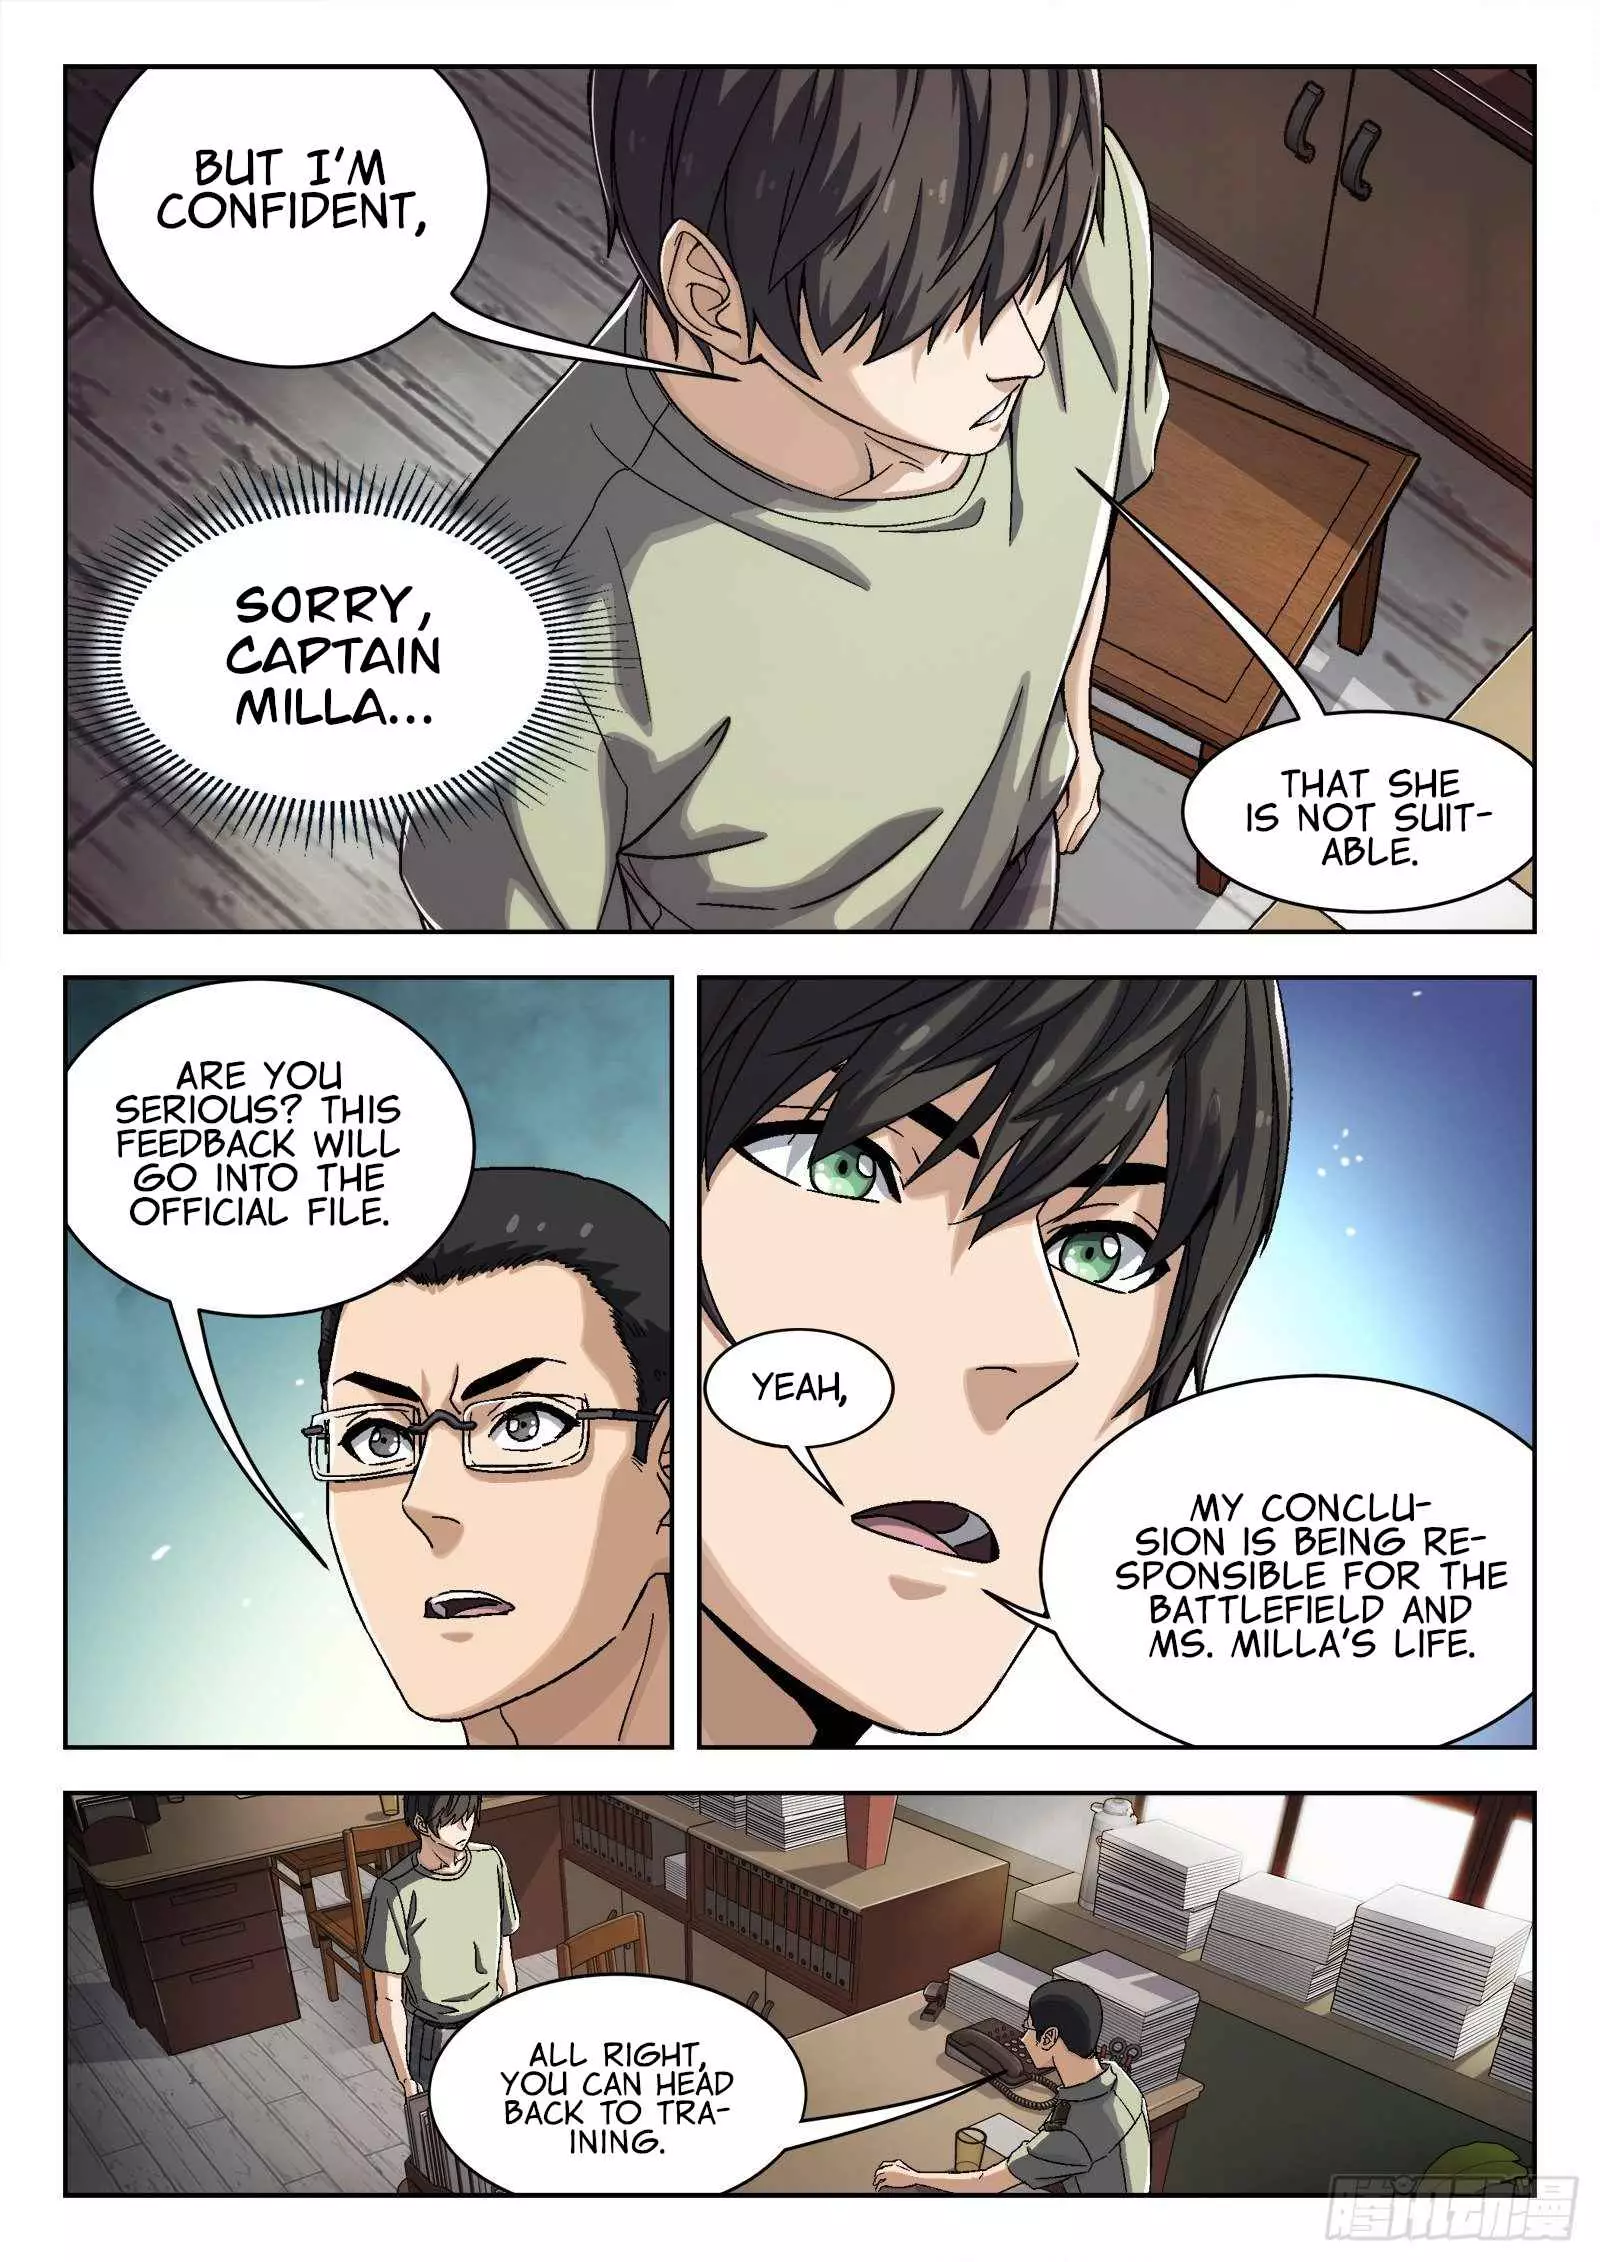 Beyond The Sky - 31 page 5-15d98c88